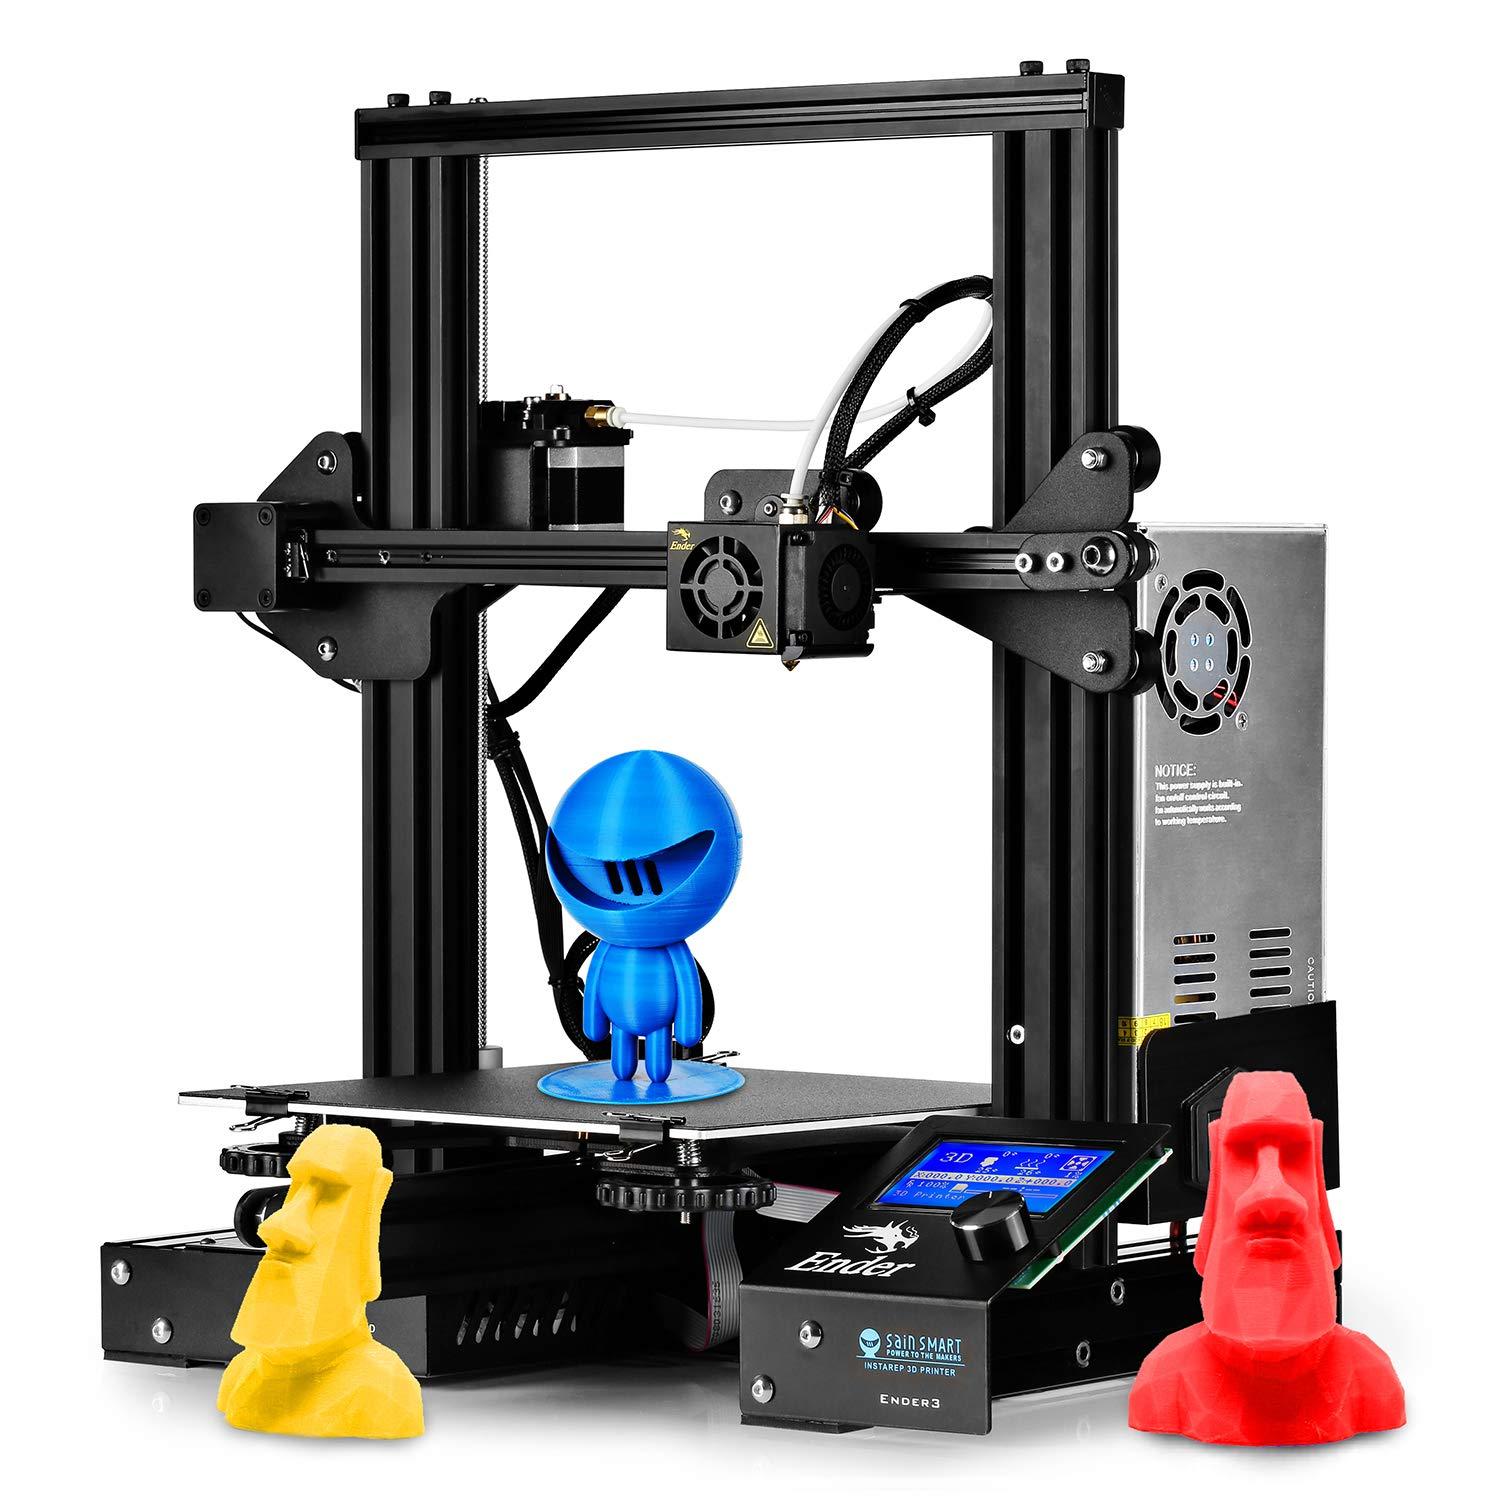 SainSmart x Creality Ender-3 Pro 3D Printer + Accessories for $179.99 Shipped